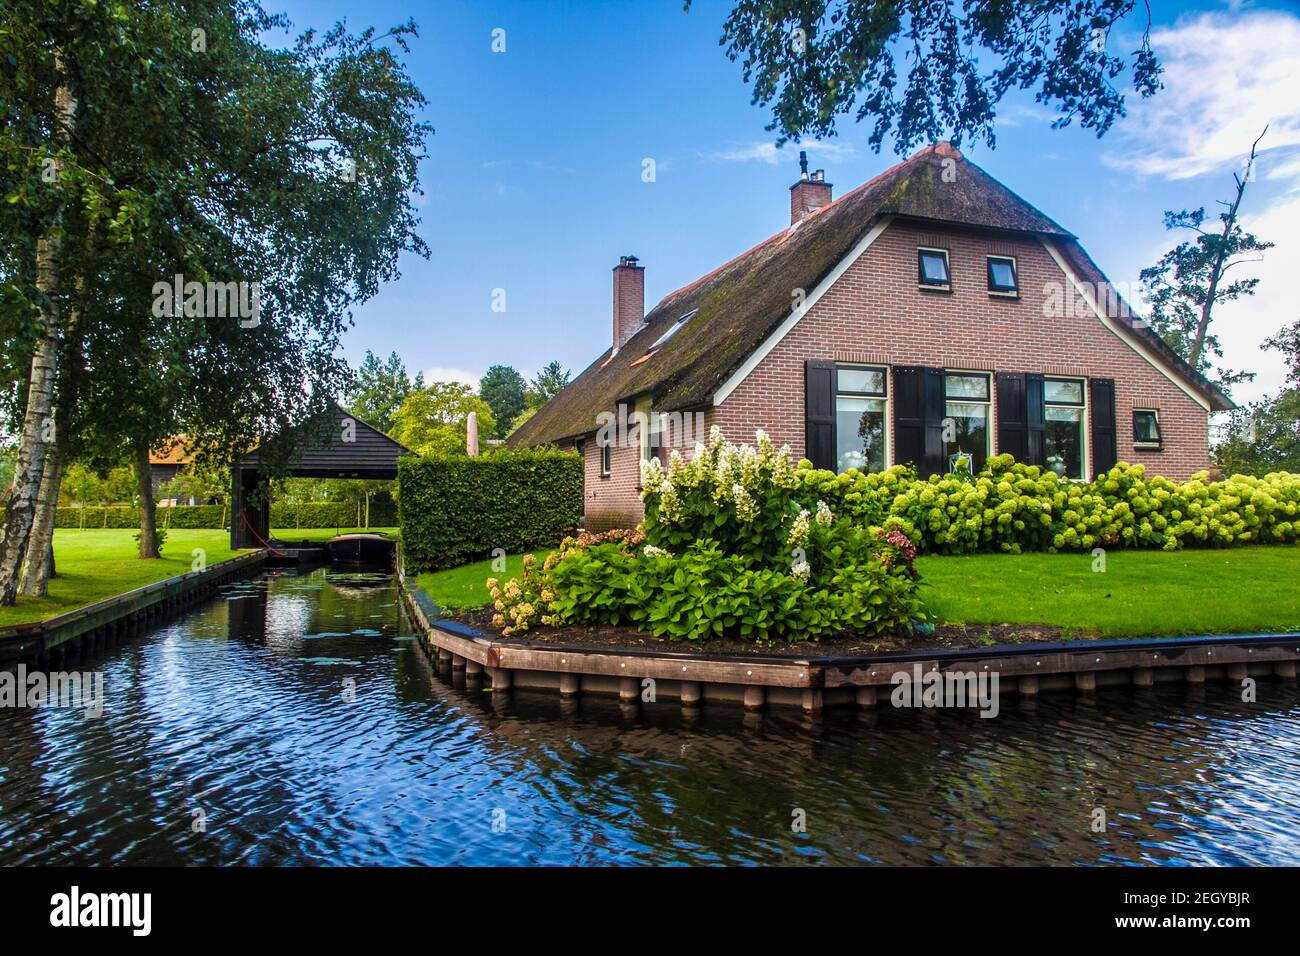 Giethoorn is a town in the province of Overijssel, Netherlands It is located in the municipality of Steenwijkerland, about 5 km southwest of Steenwijk Stock Photo